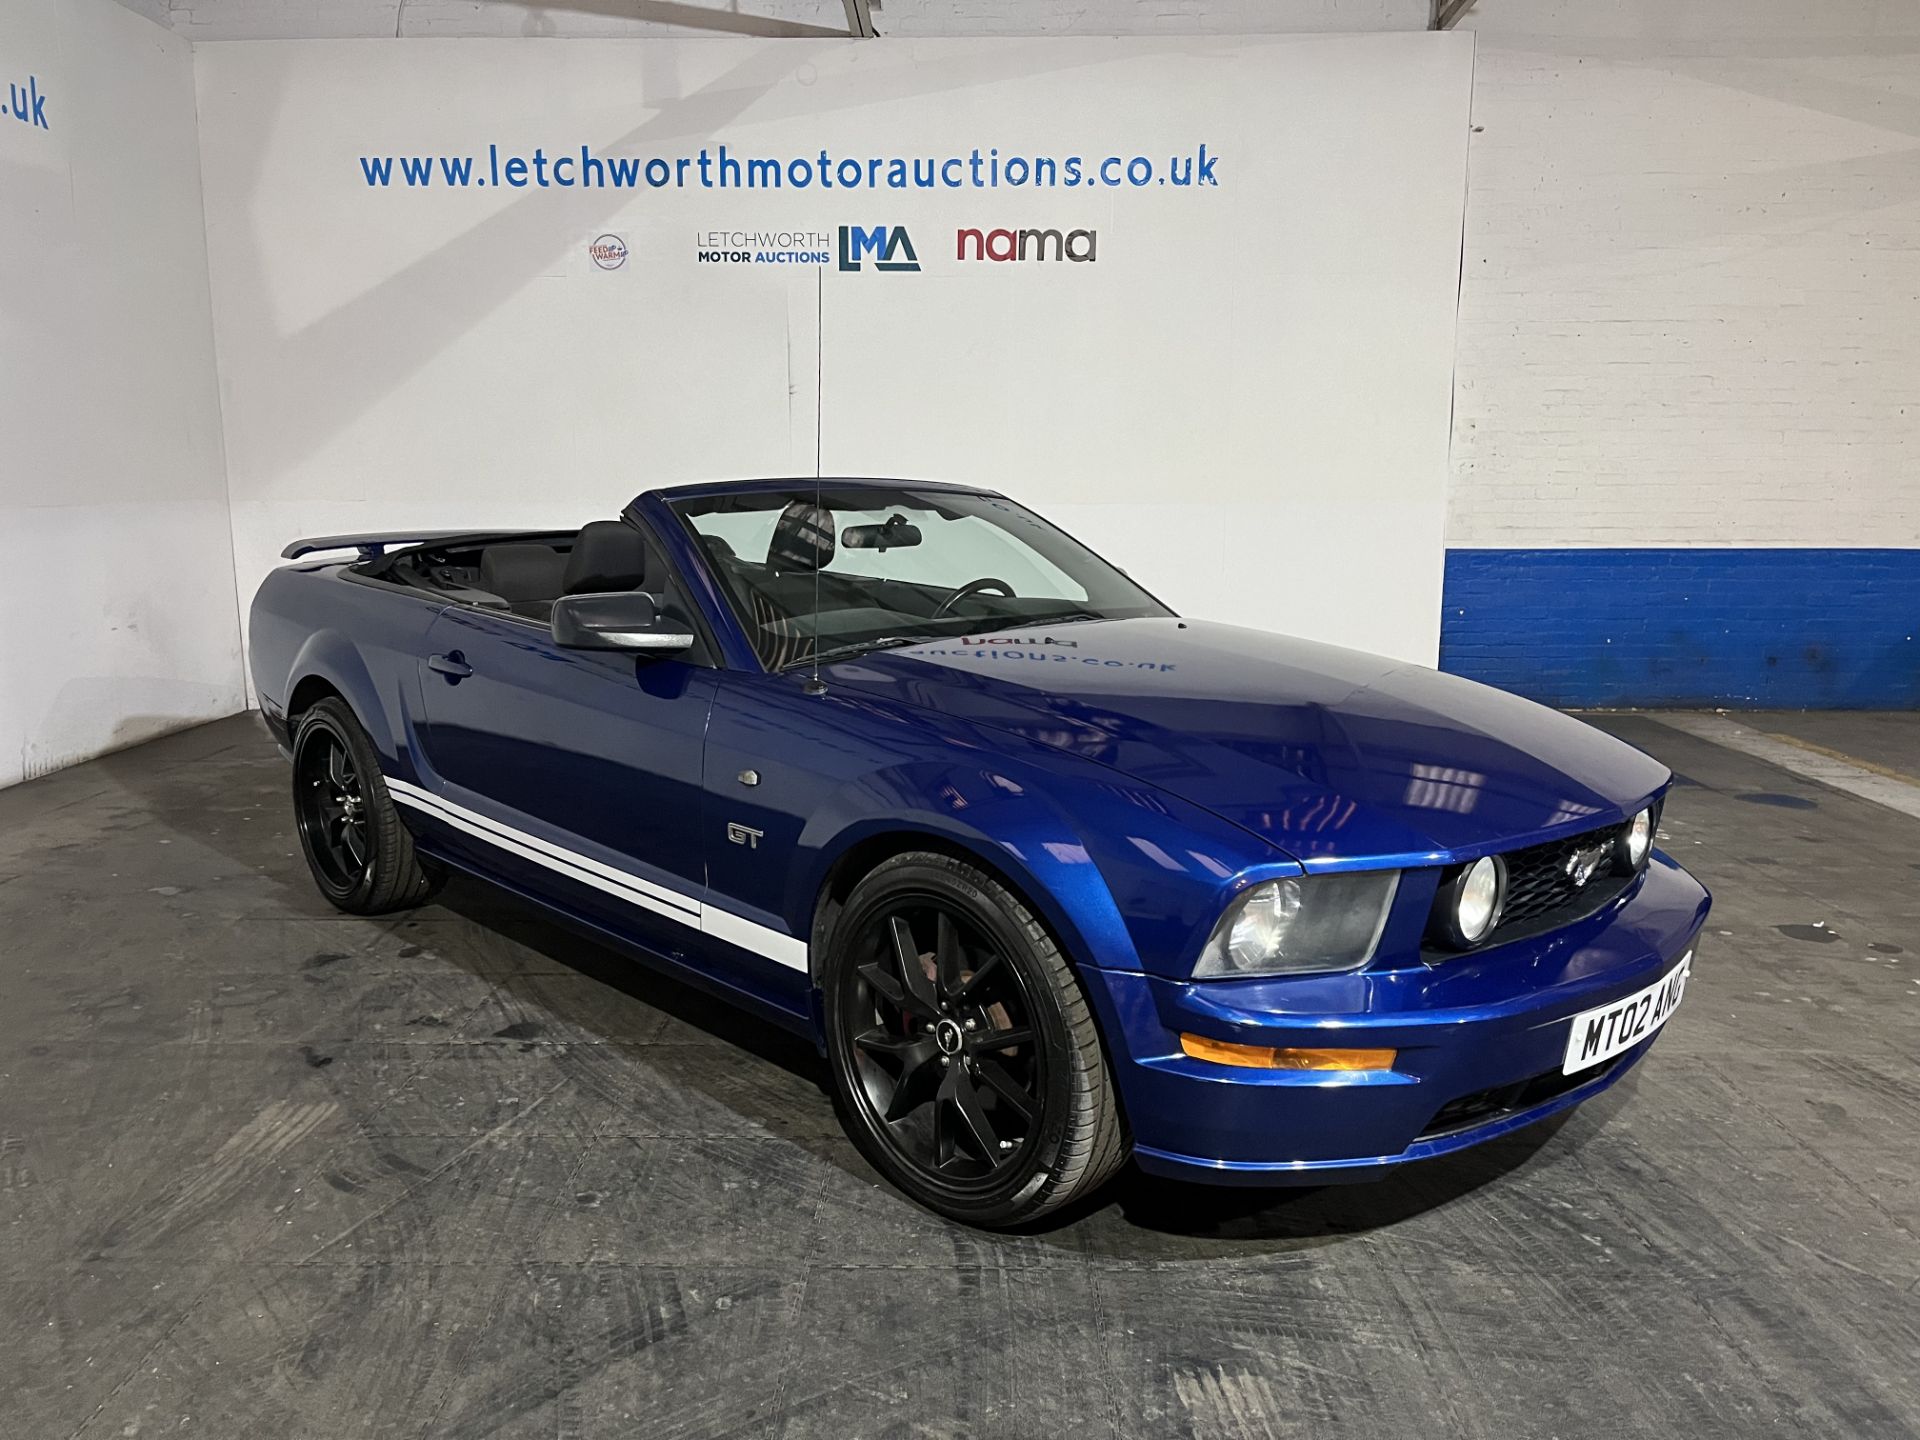 2006 Ford Mustang Convertible - 4700cc